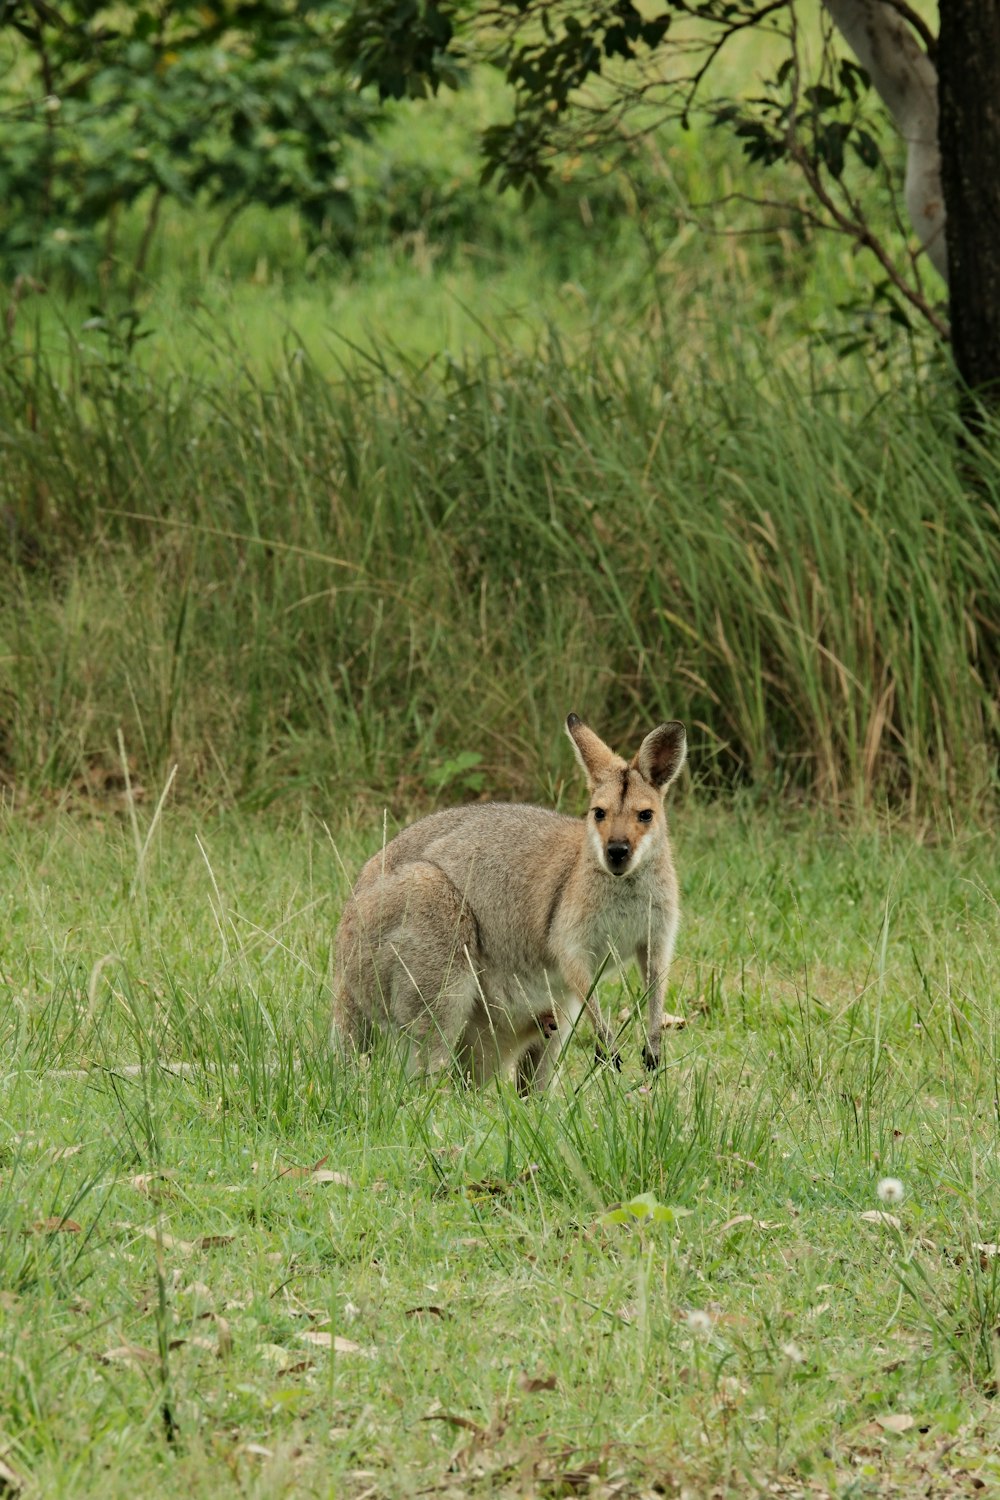 a kangaroo standing in a grassy field next to a tree